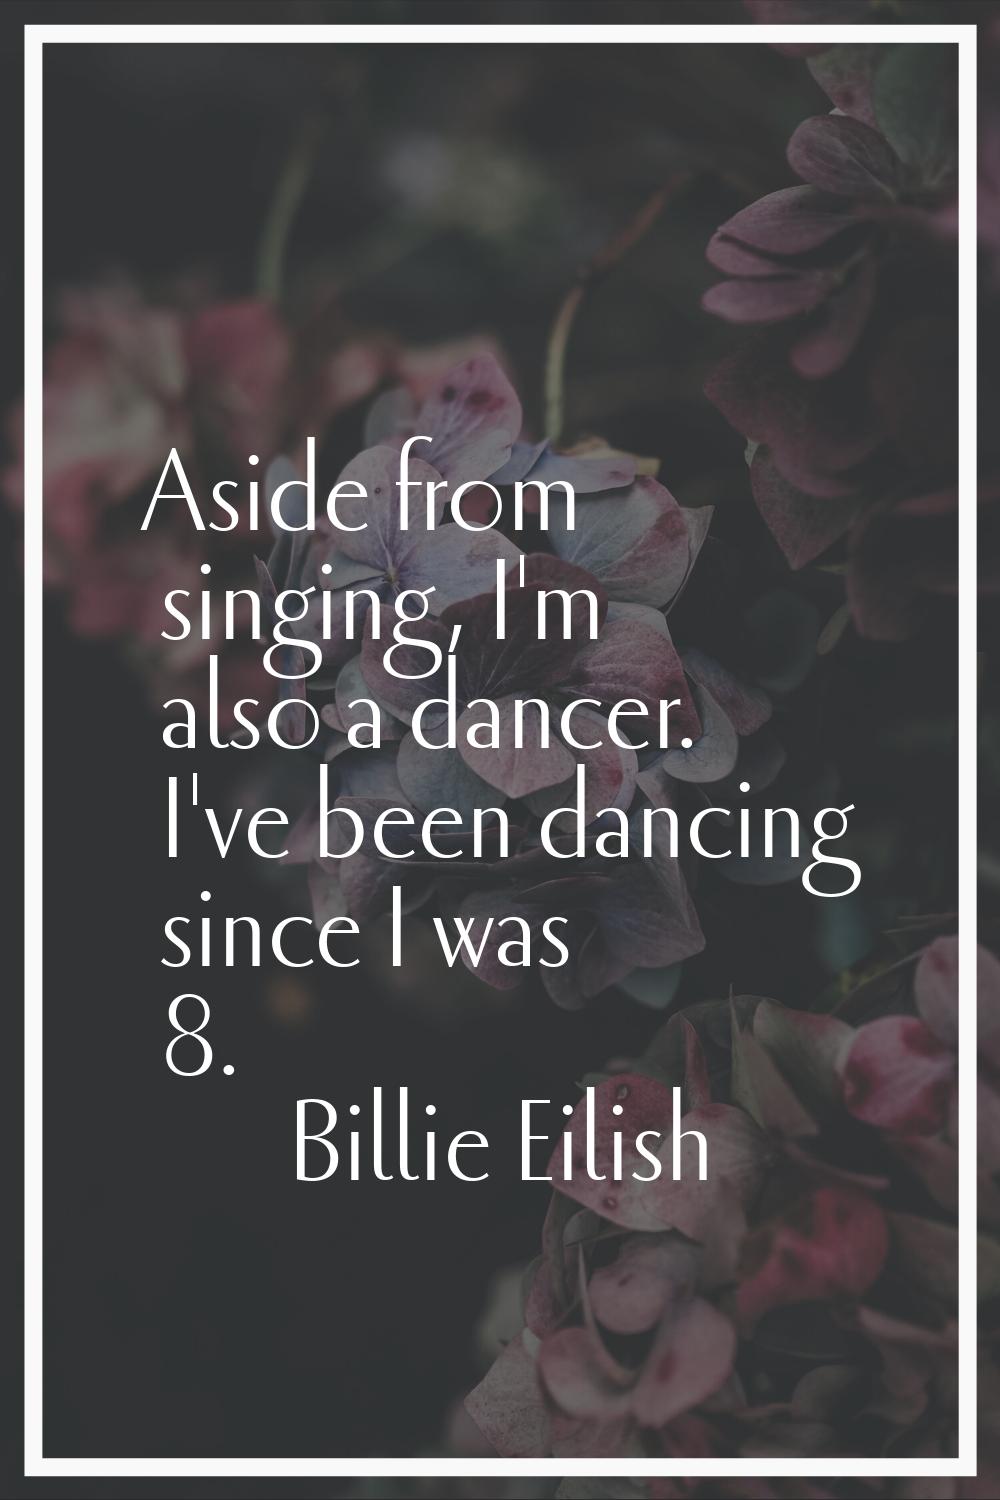 Aside from singing, I'm also a dancer. I've been dancing since I was 8.